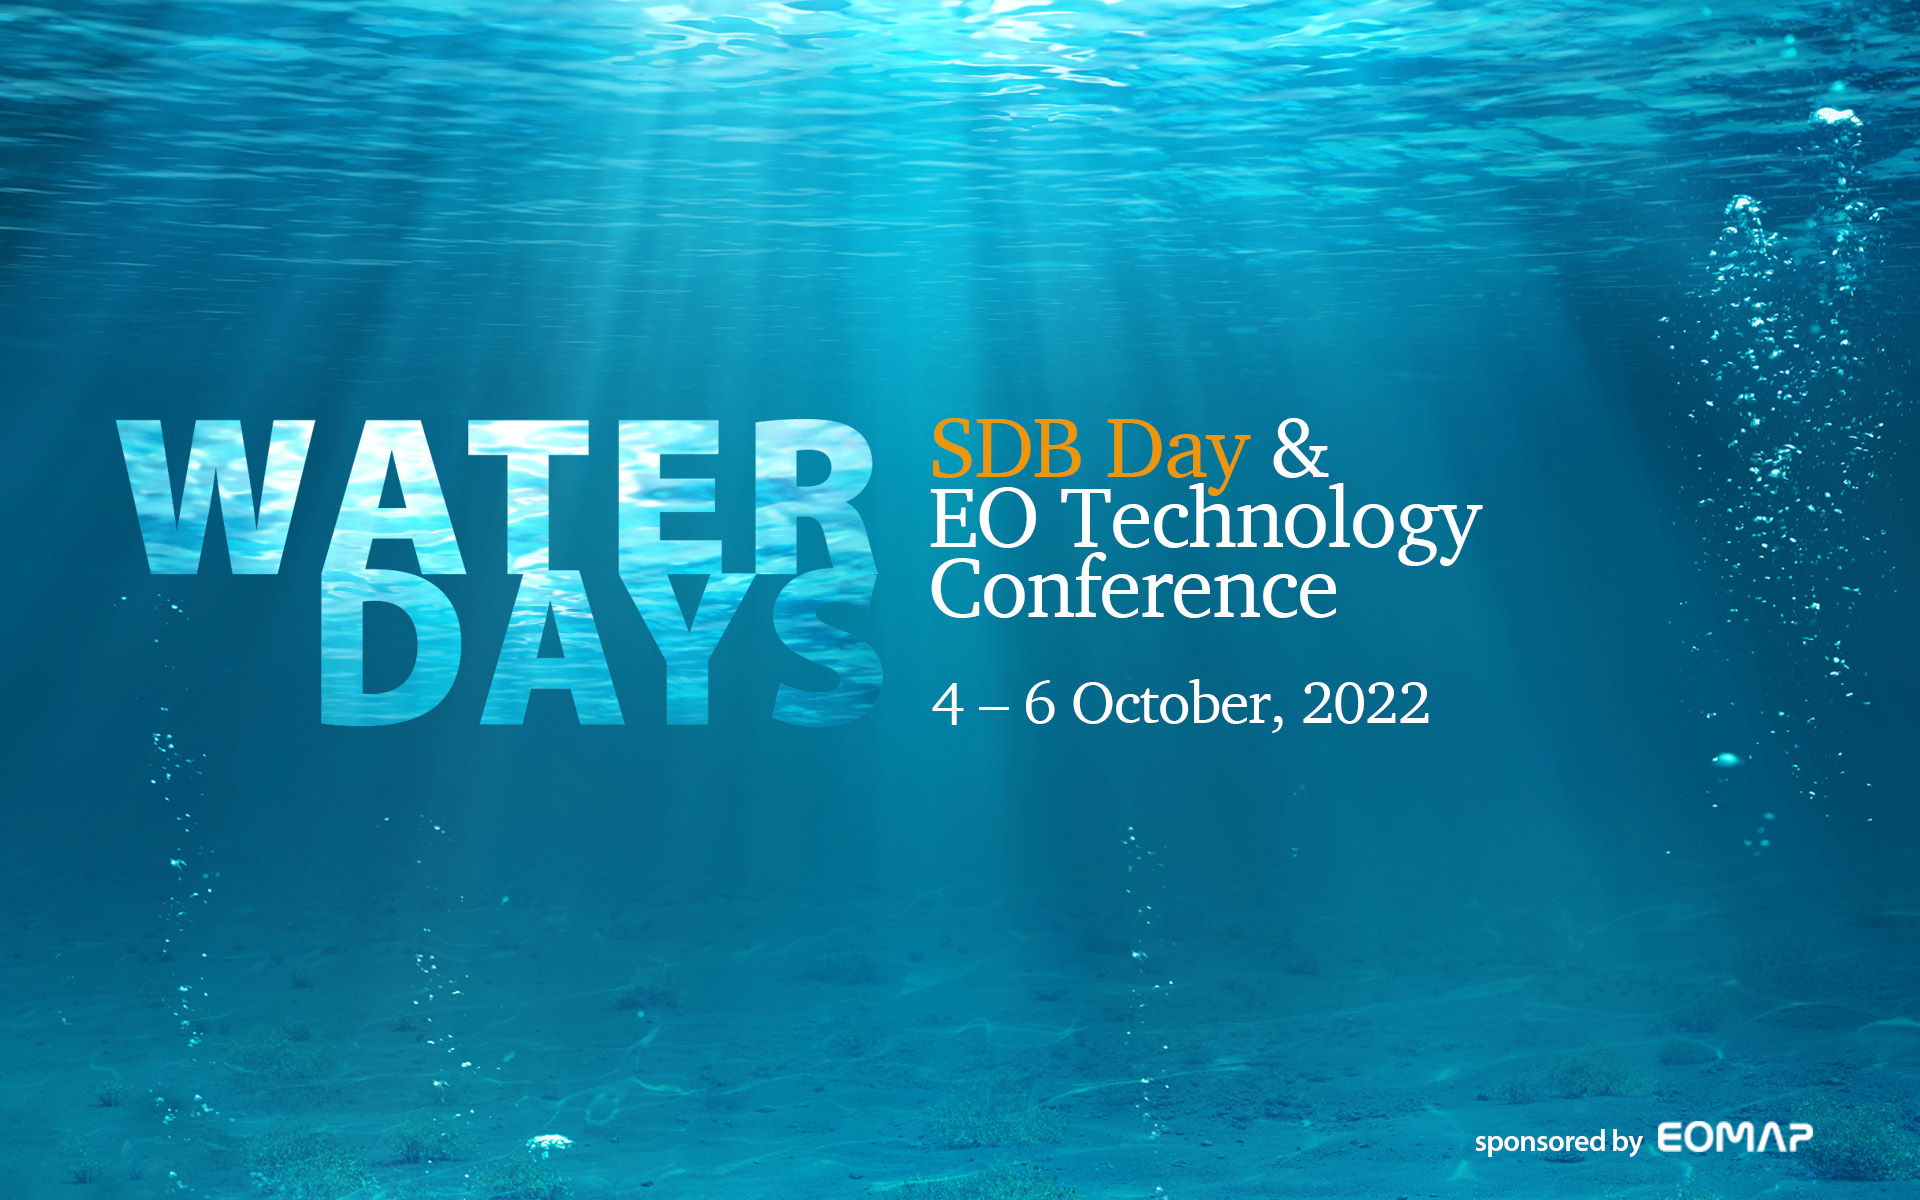 Water Days in October, 2022 - key visual of the EO Technology Conference